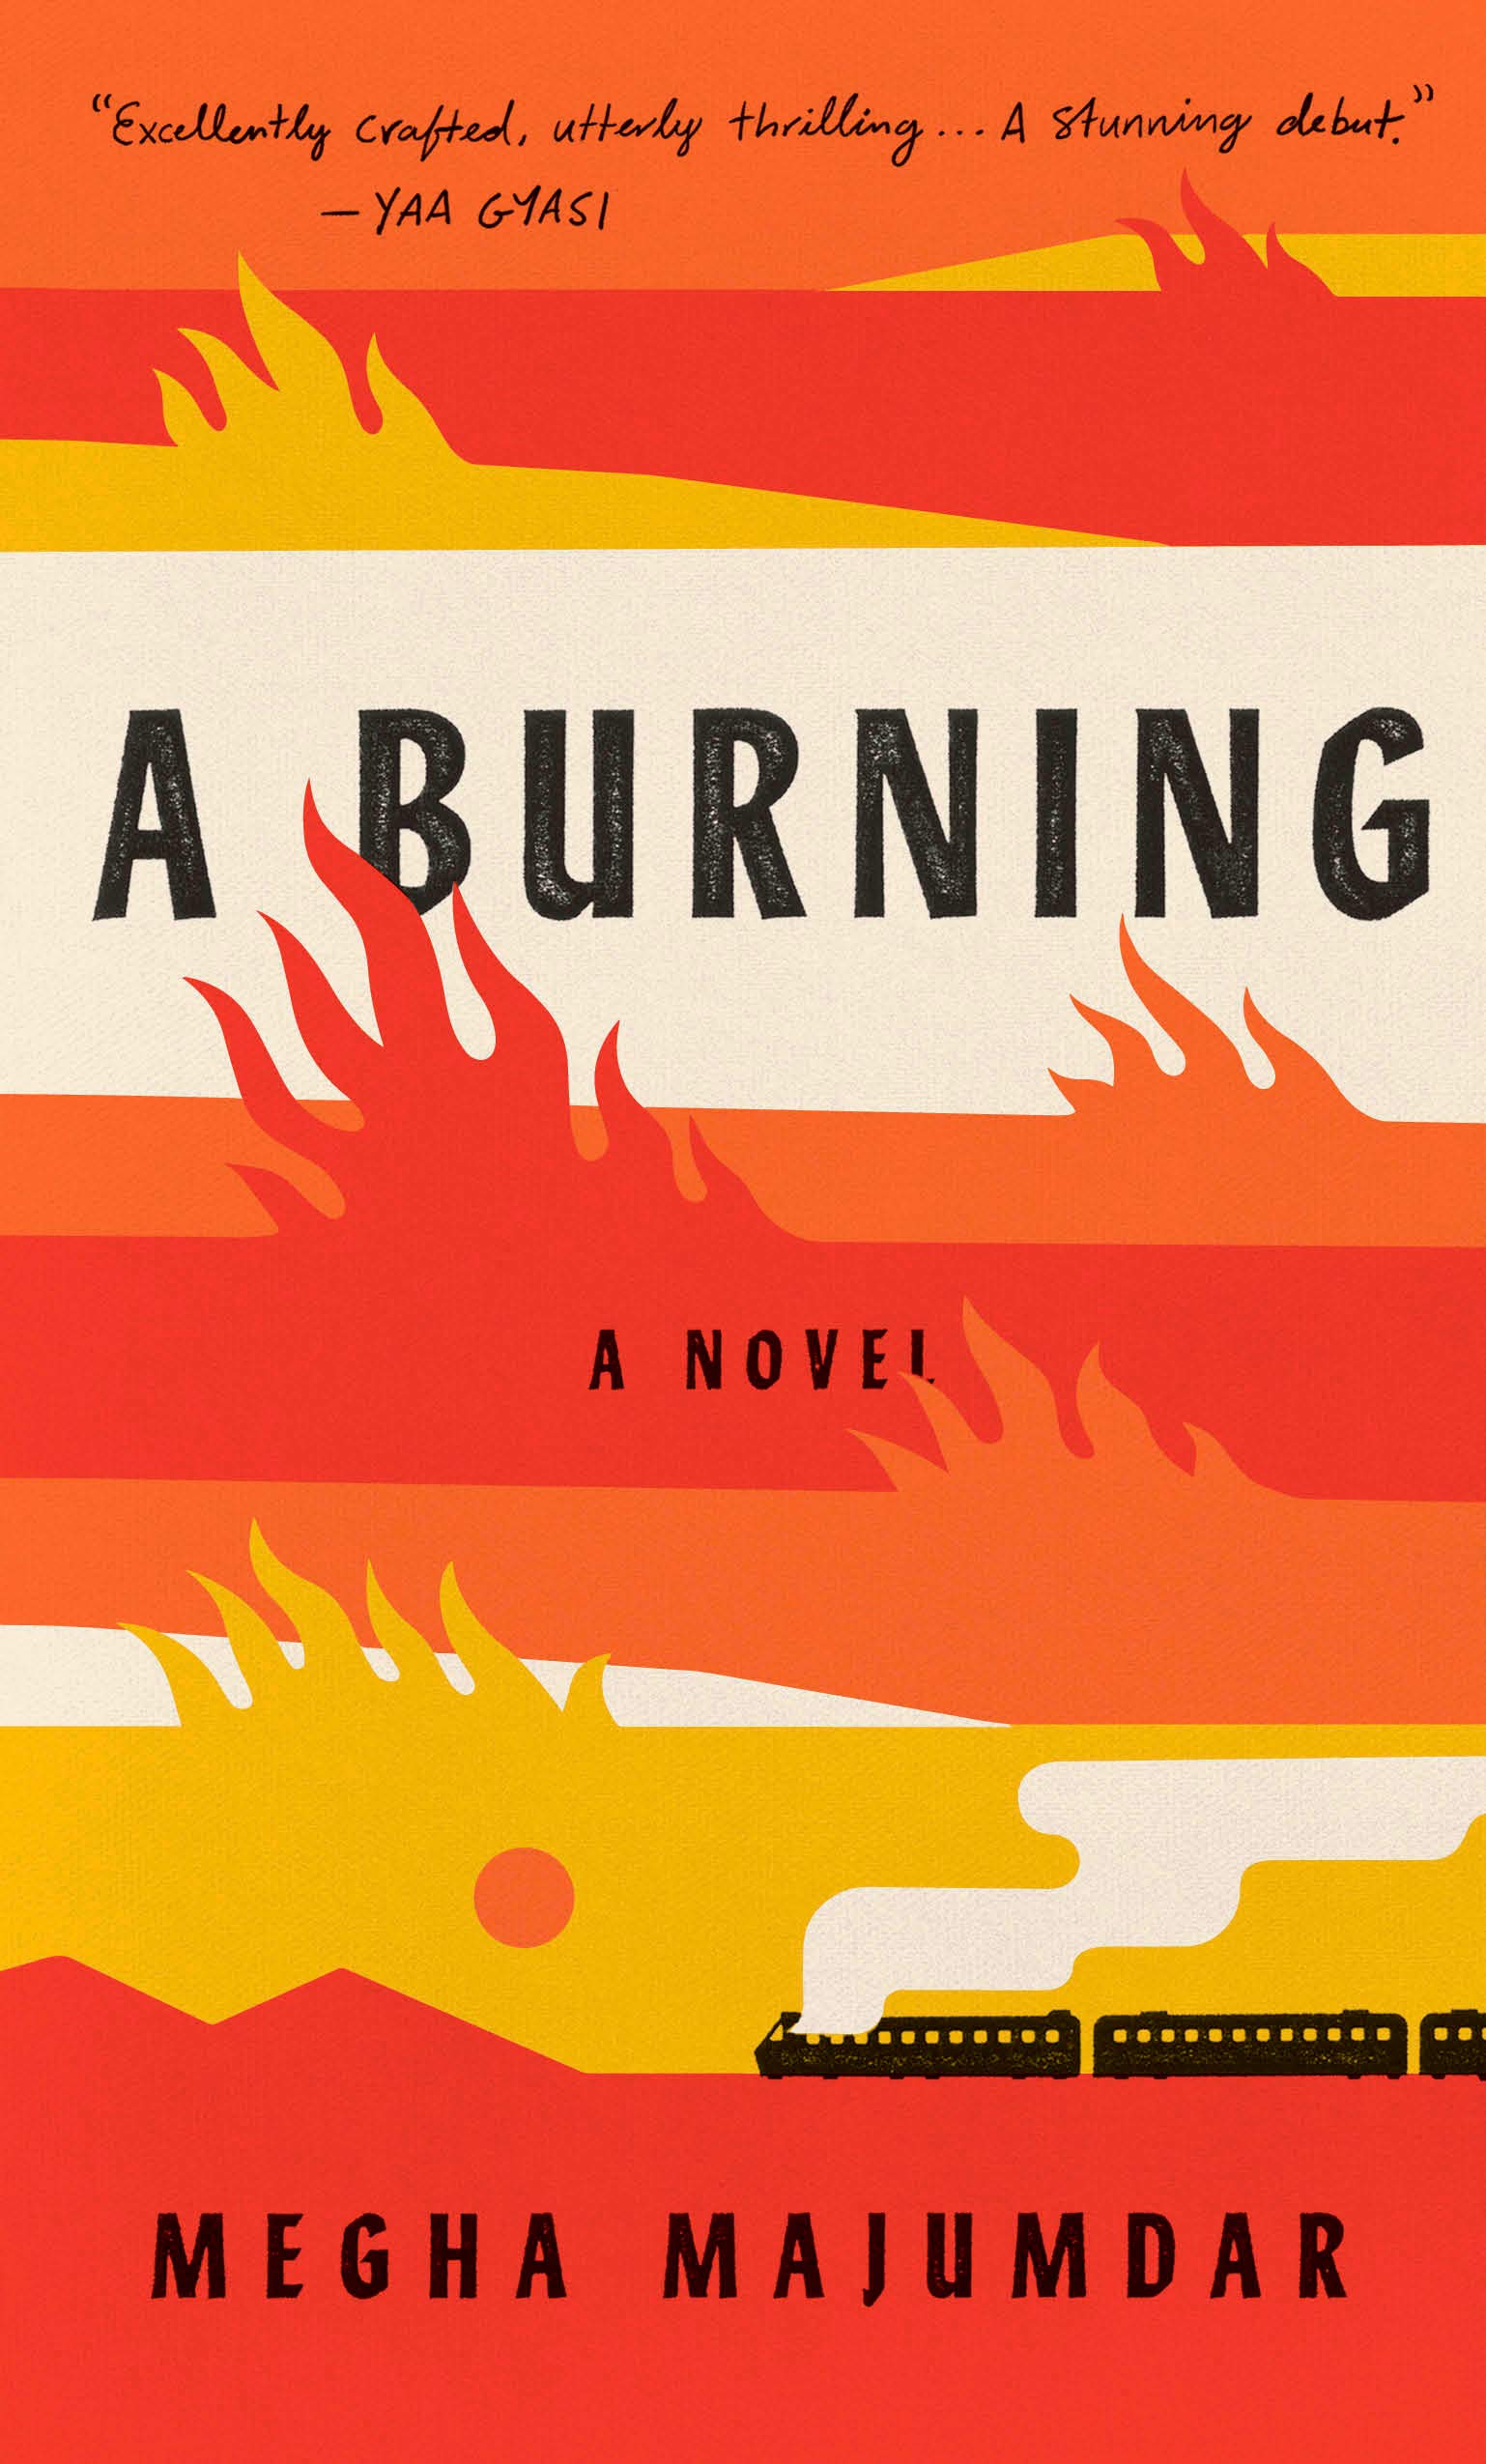 The cover of A BURNING